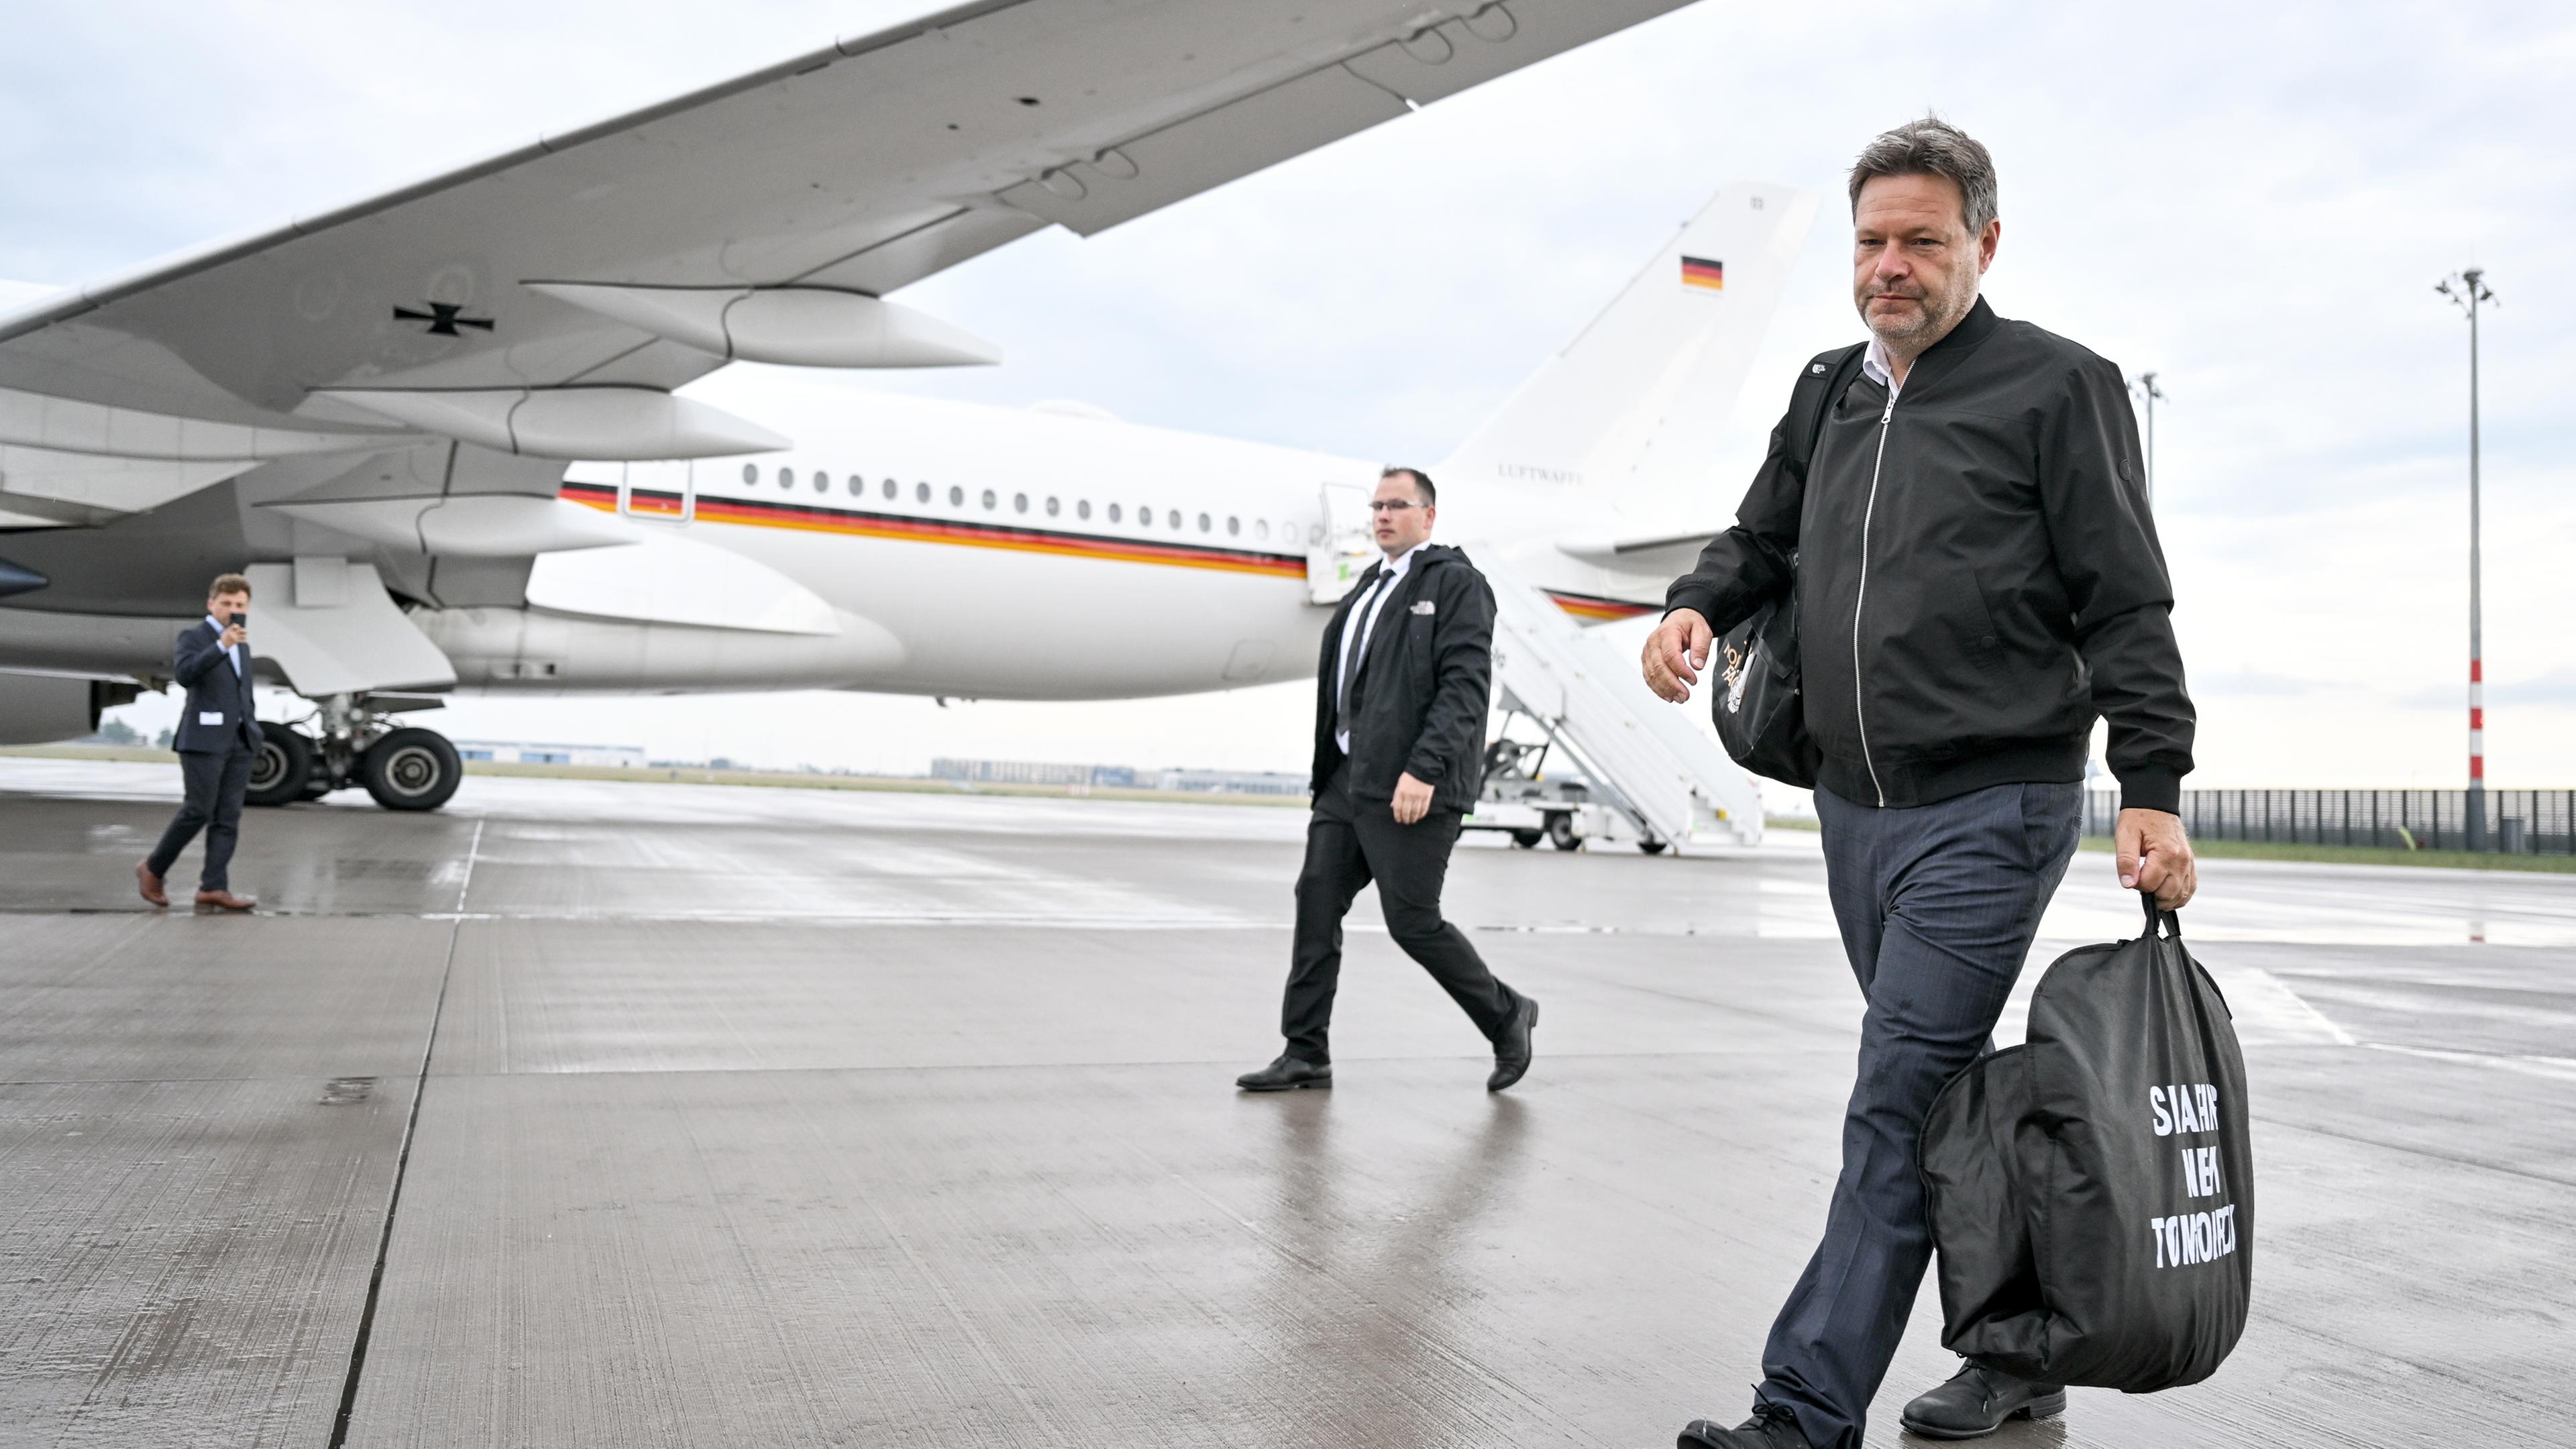 Robert Habeck (Bündnis 90/Die Grünen), Vice-Chancellor and Federal Minister for Economy and Climate Protection, boards a ready-to-fly plane.  The minister travels to Israel, the Palestinian Territories and Jordan.  The trip will address current political and economic affairs, as well as energy and climate protection.